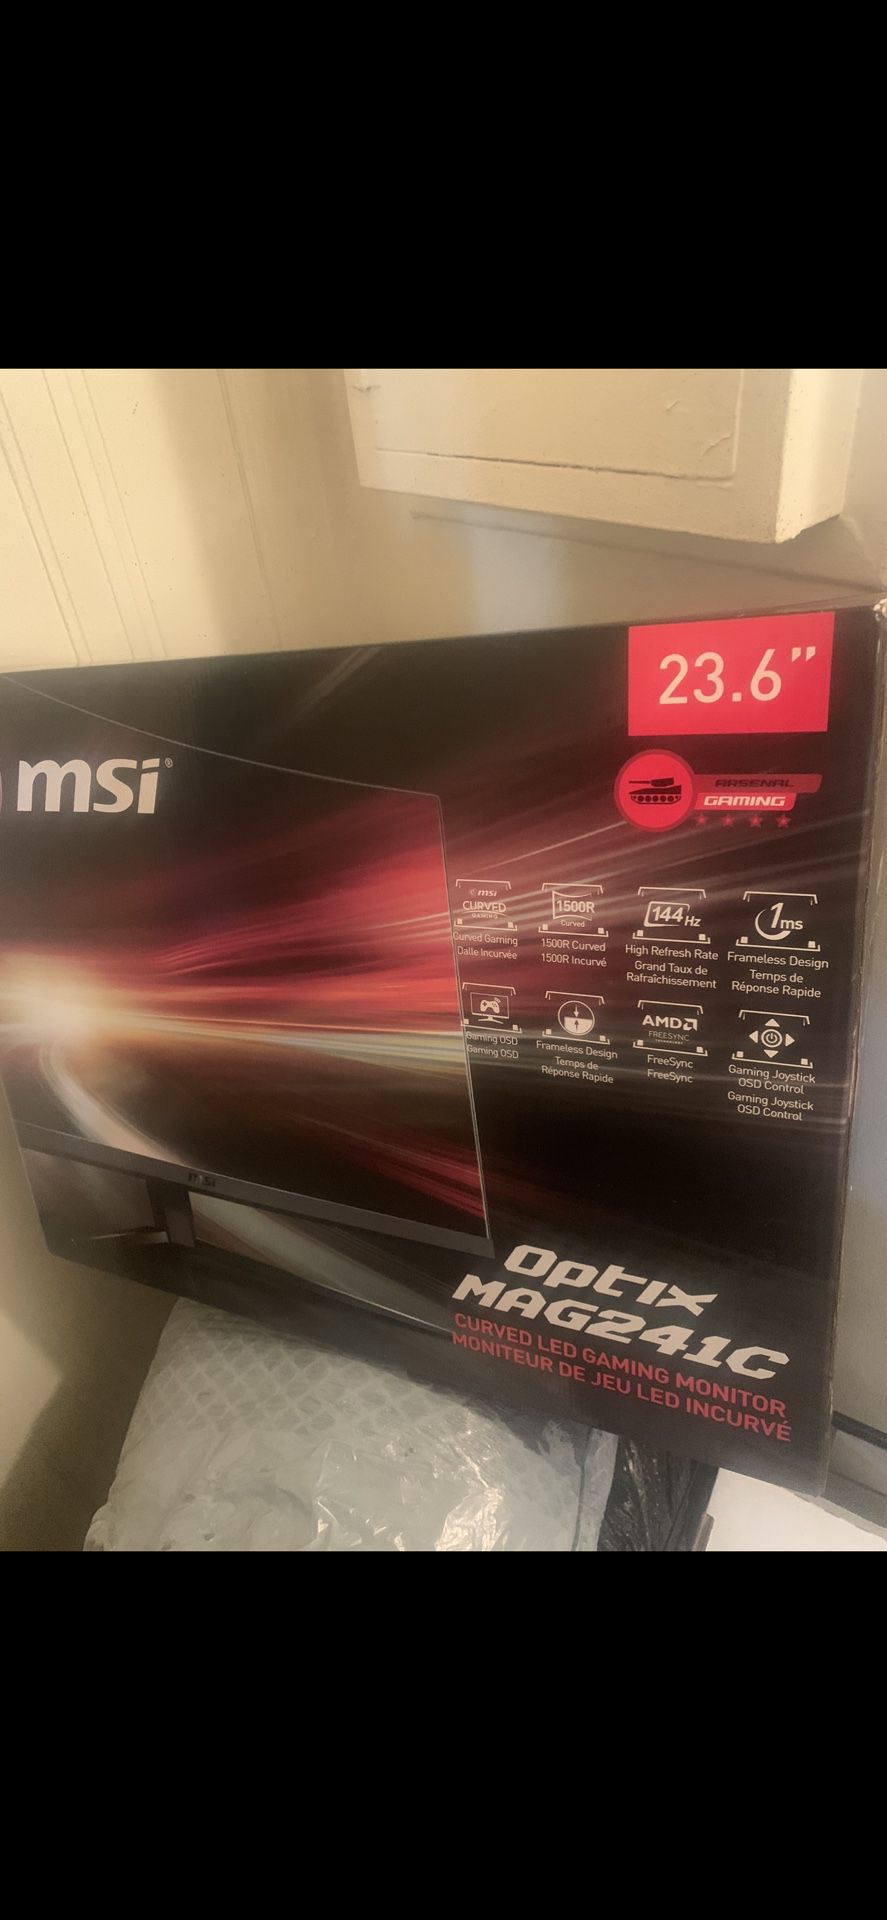 Msi Curved 23.6 Inch Monitor